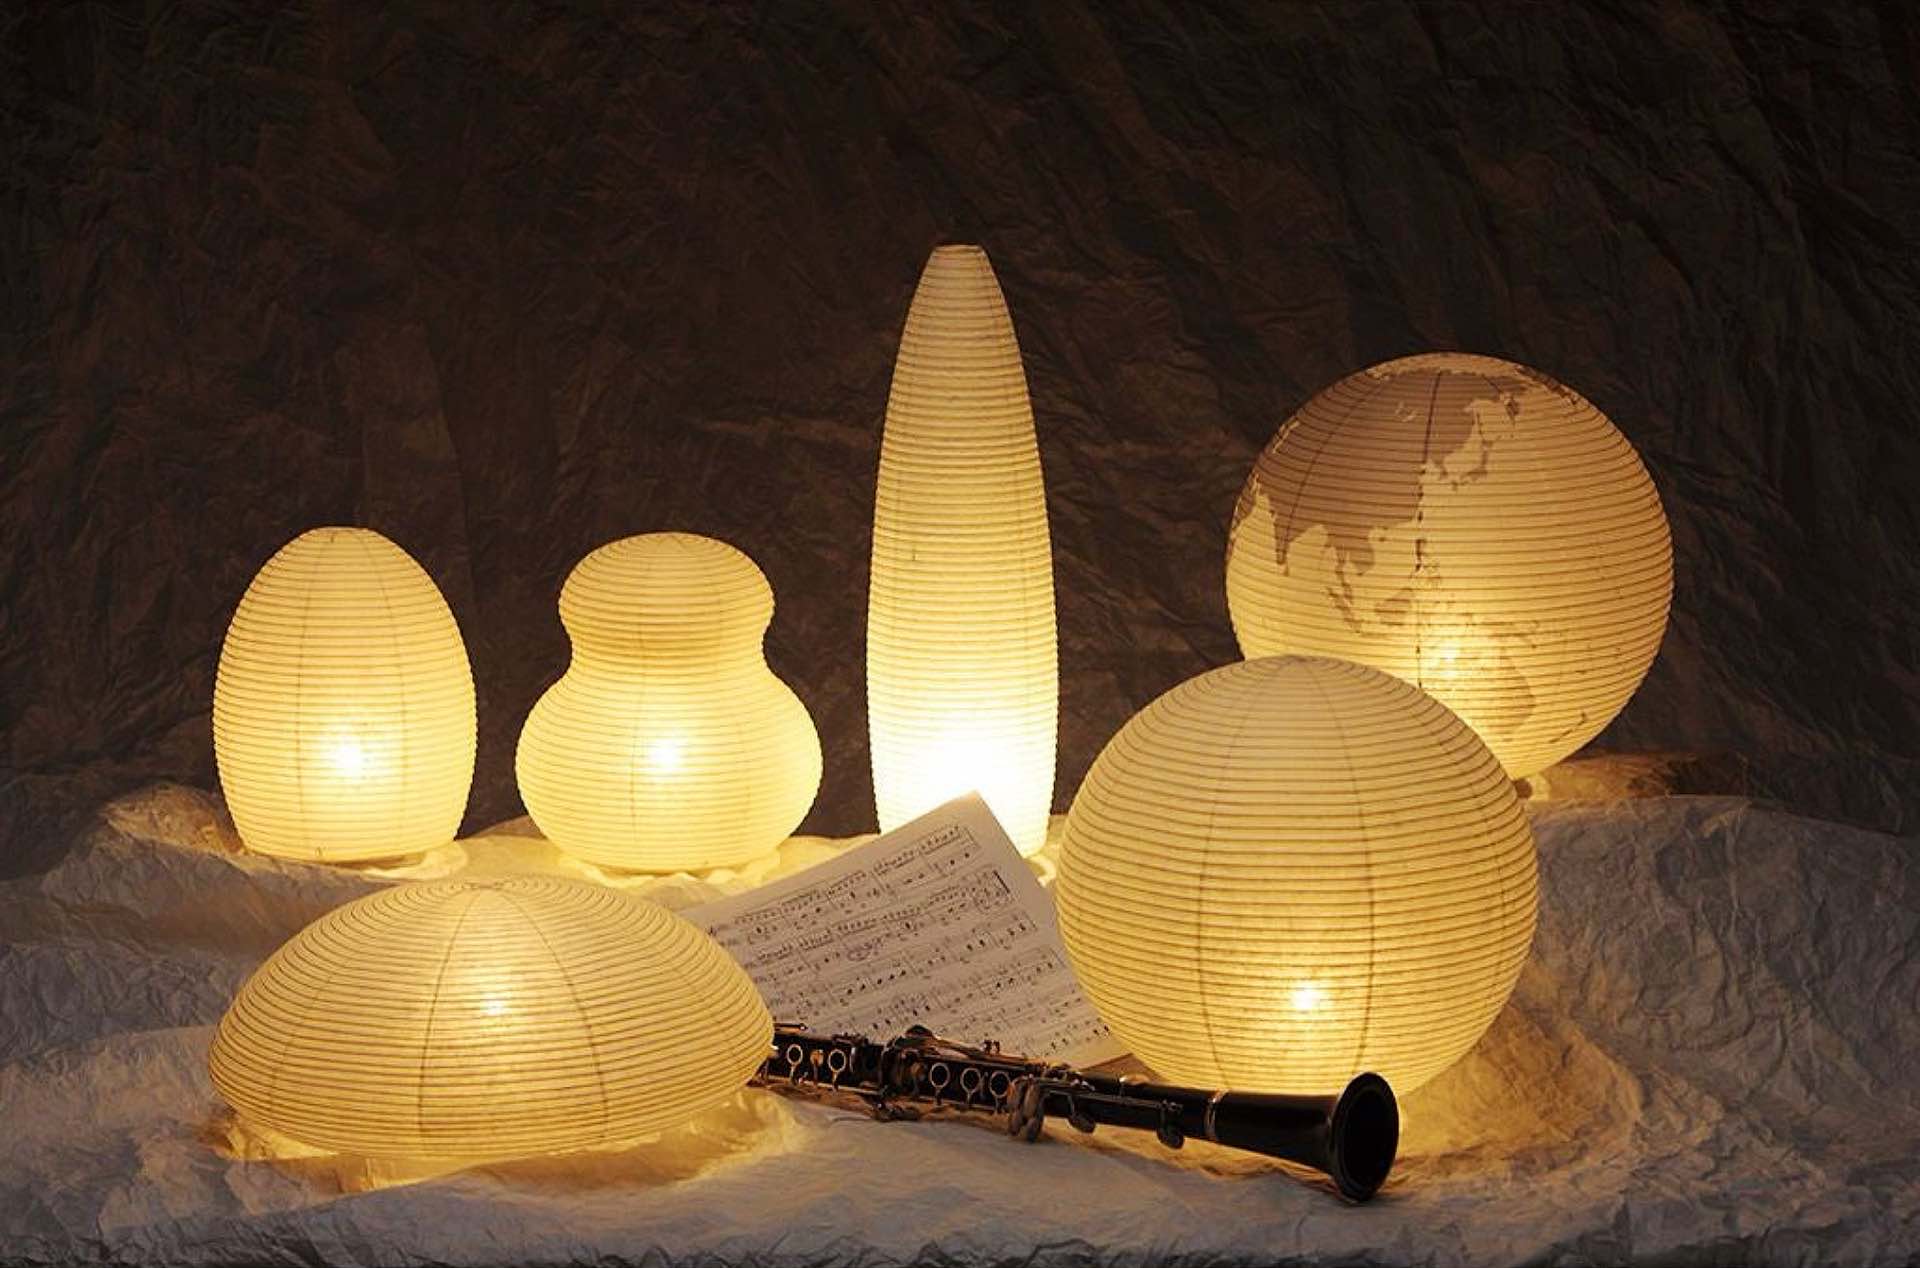 asano-paper-moon-handcrafted-washi-paper-lamps